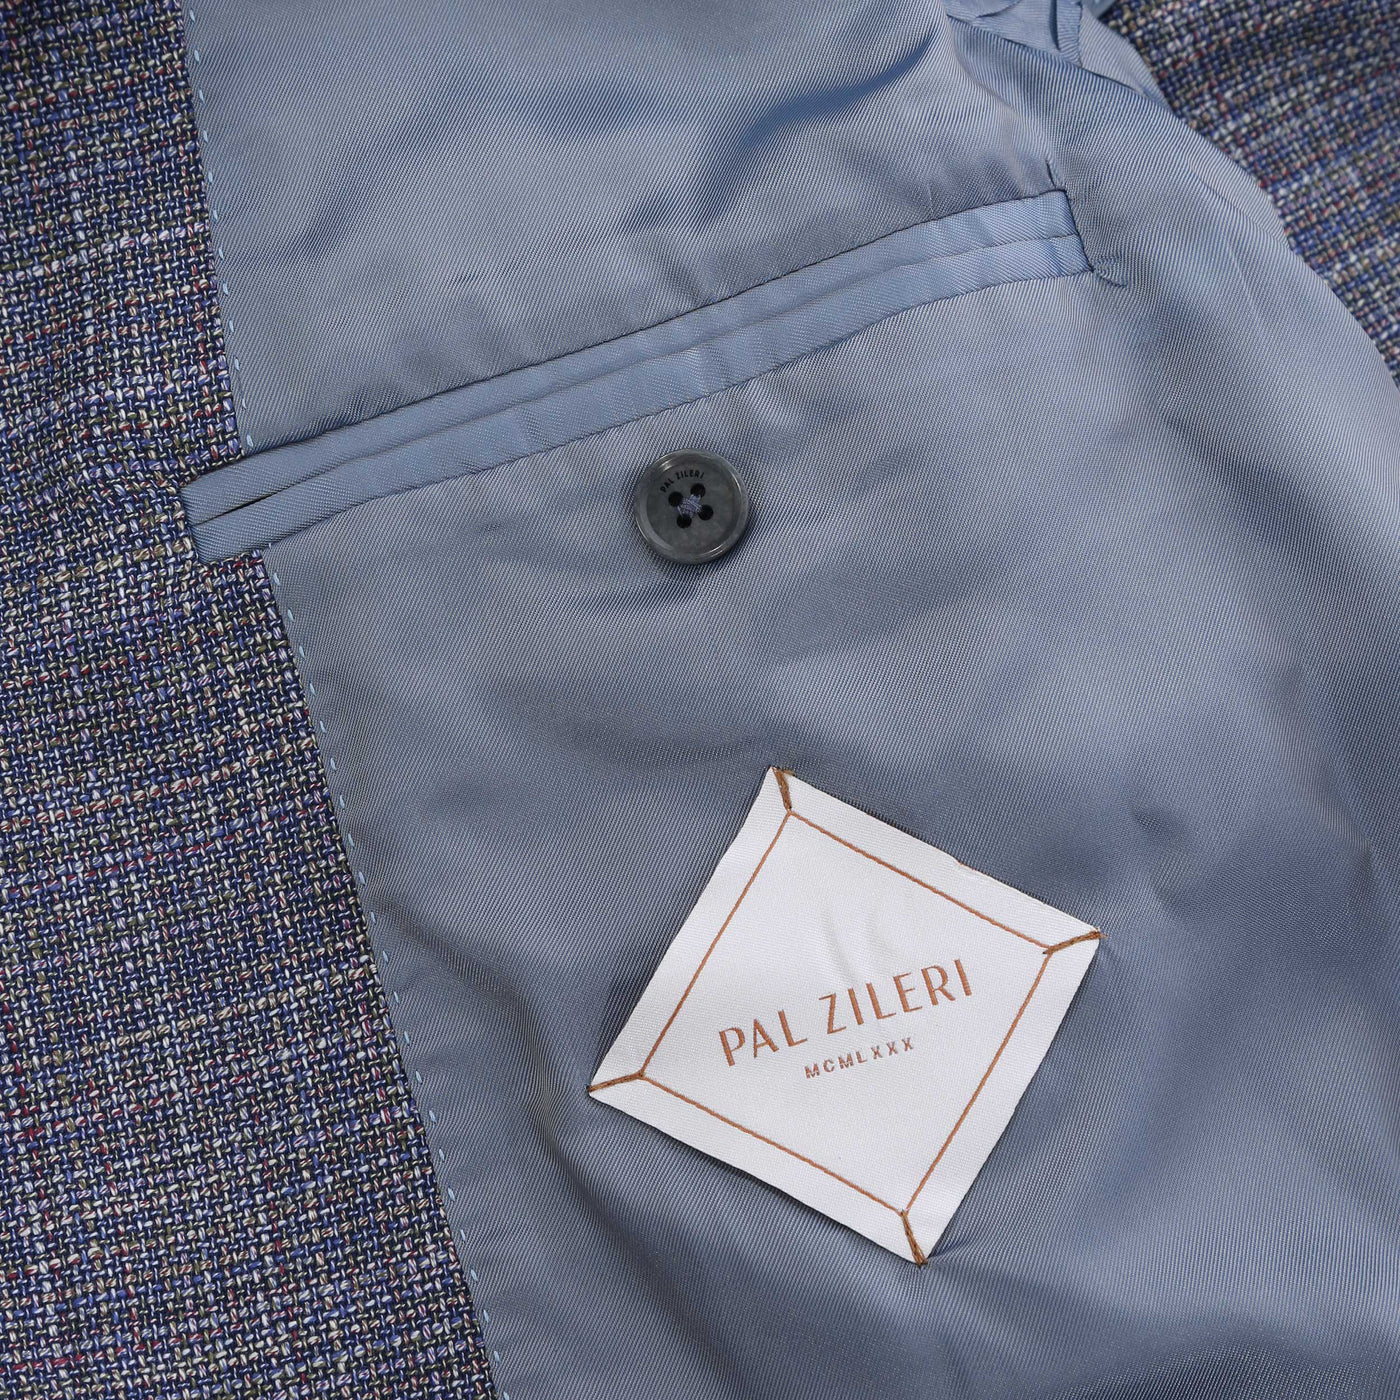 Pal Zileri Open Weave Blue Check Jacket in Blue Check Lining